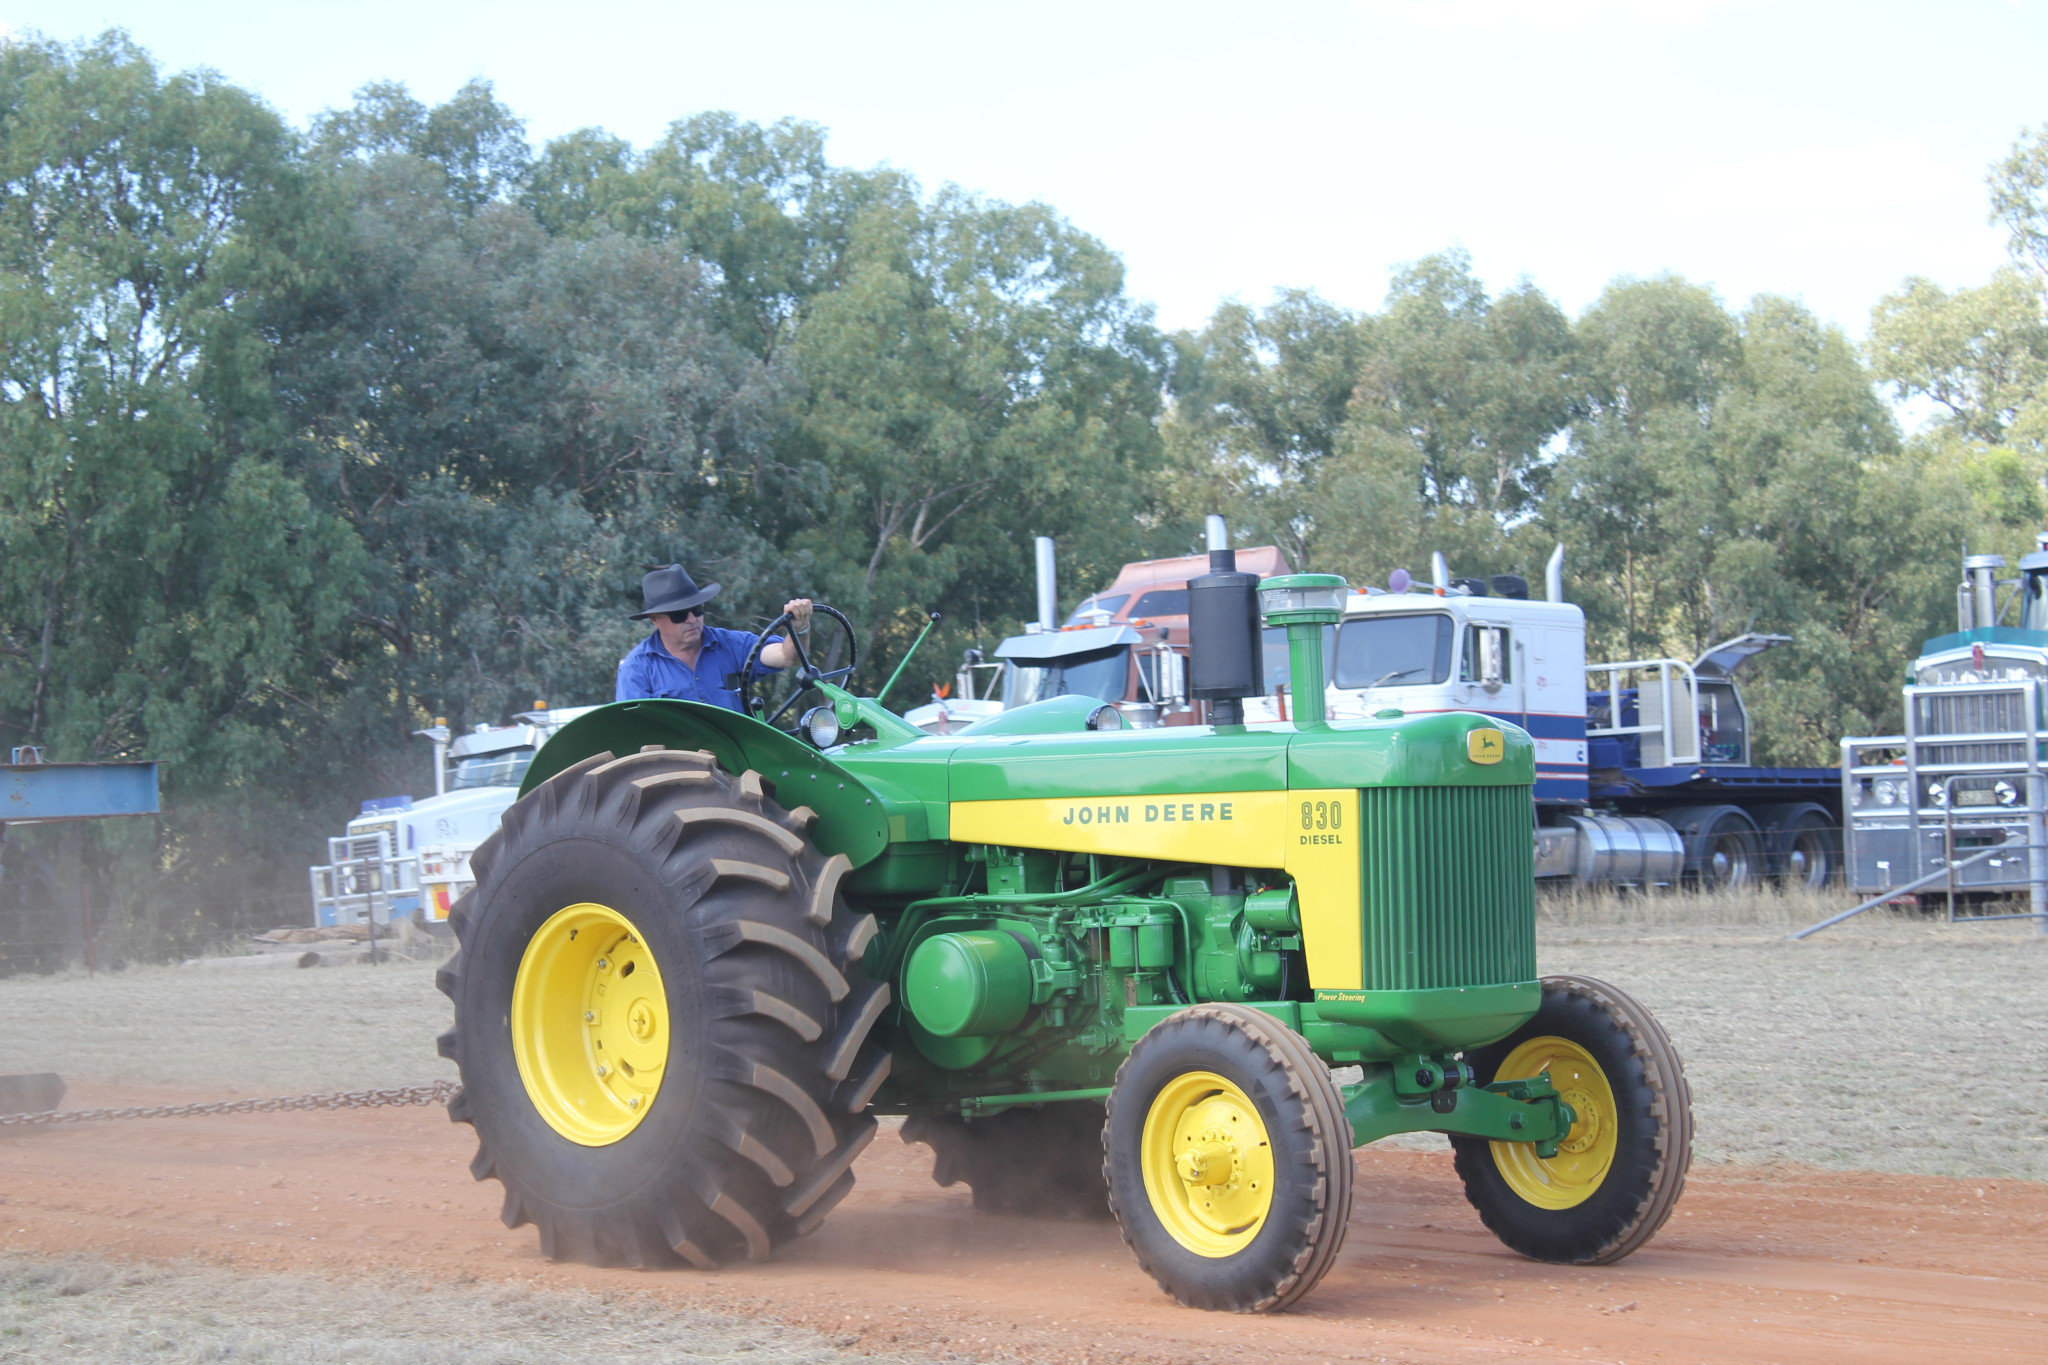 Graham Williams’ John Deere 380 put on an impressive performance in the open section competitive tractor pull and also won best restored vehicle of the day at Easter Saturday’s event. Photo by The Gilgandra Weekly: Nicholas Croker.